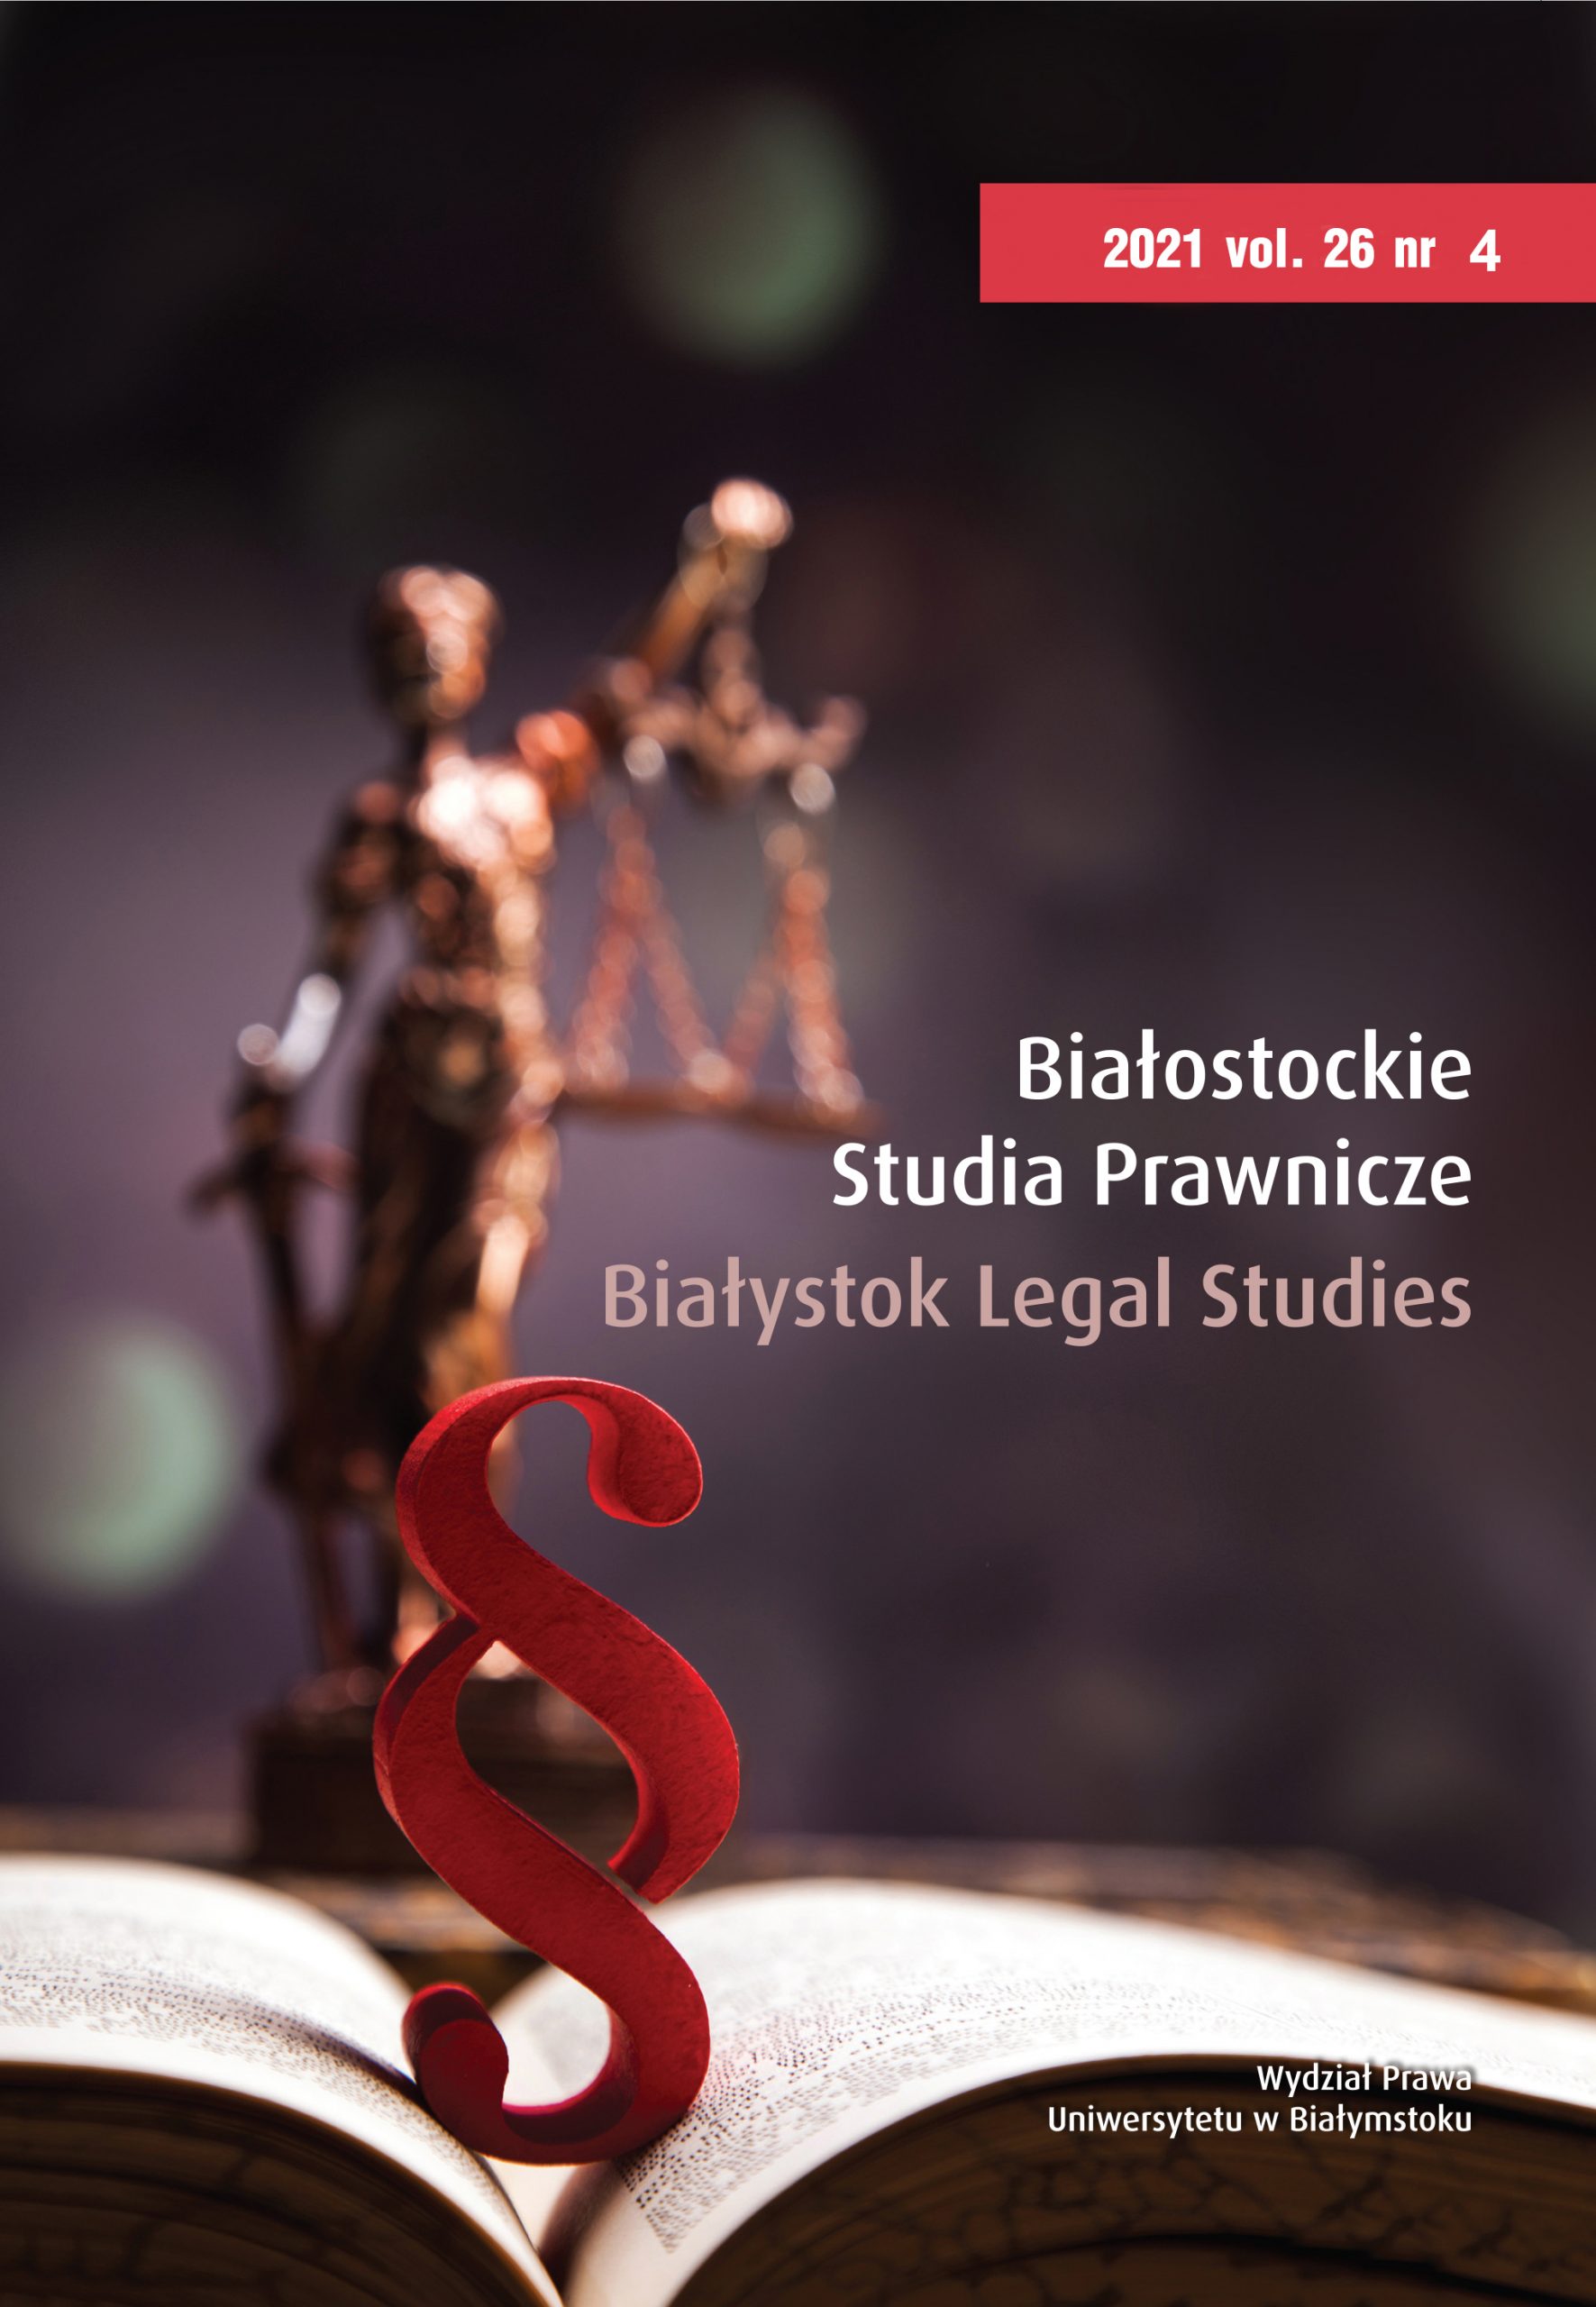 Proceedings in Tax Matters Before the Supreme Administrative Court during the COVID-19 Pandemic (2020 – July 2021) Cover Image